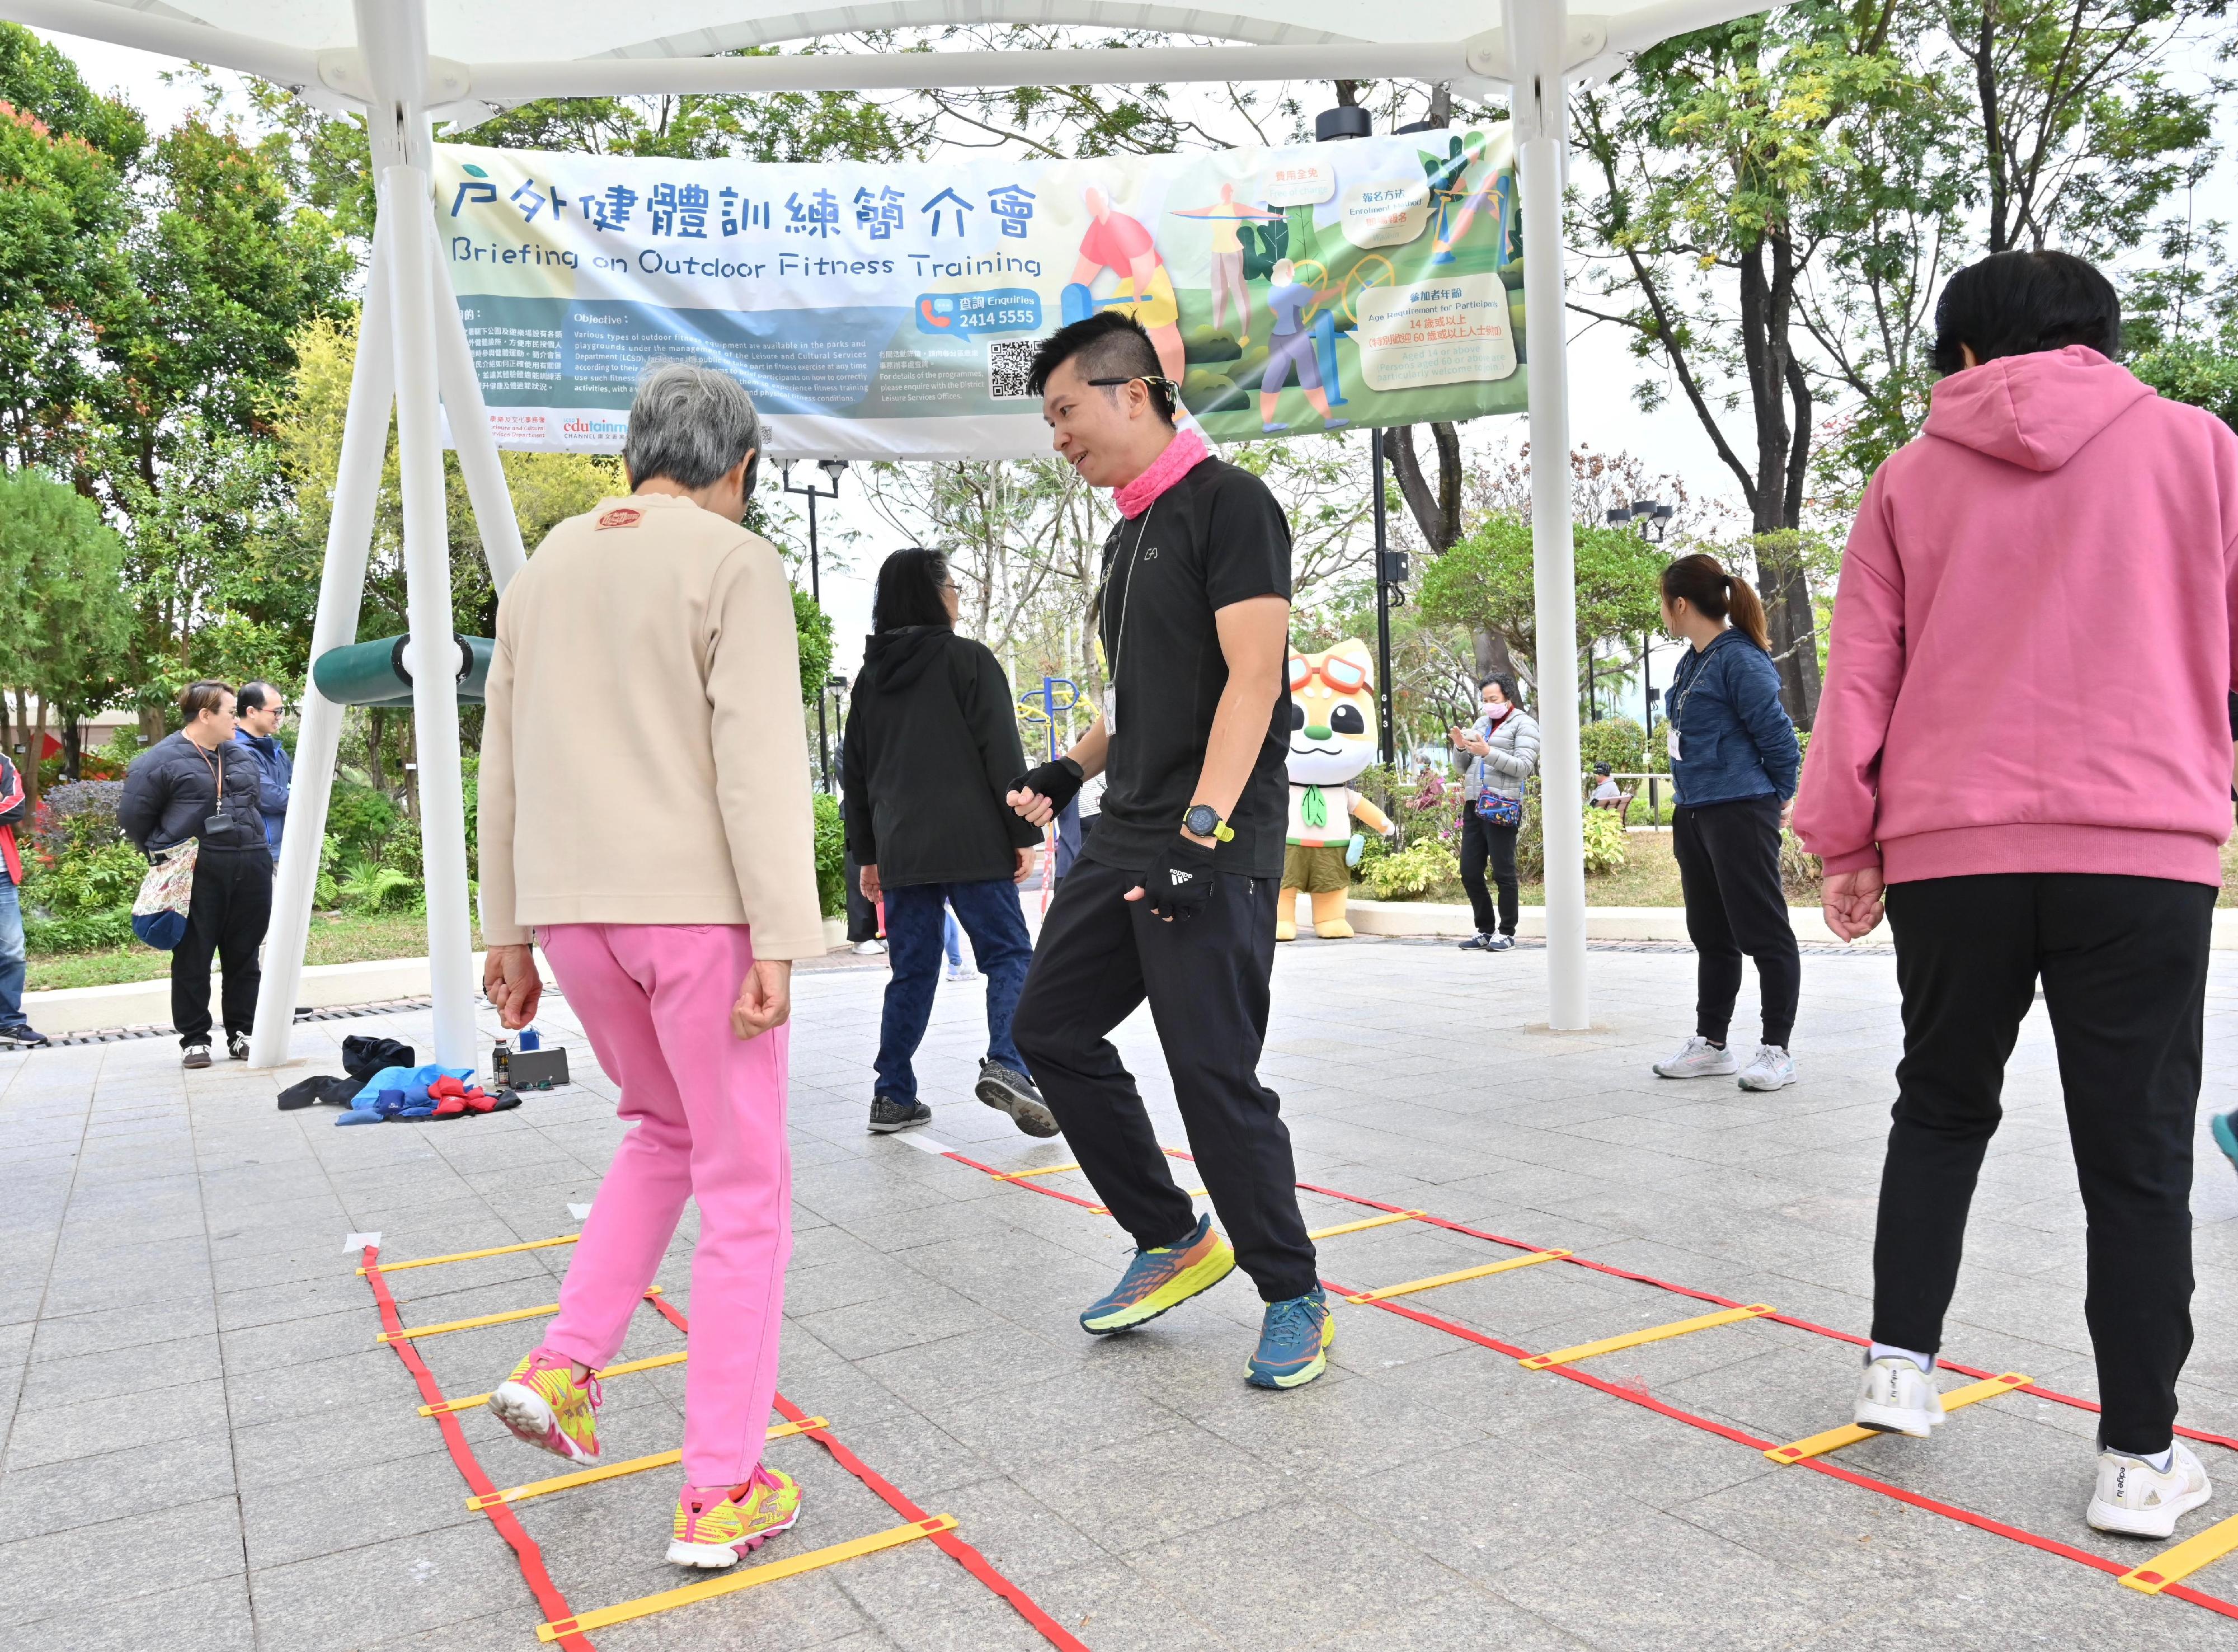 The Leisure and Cultural Services Department (LCSD) will launch a series of caring programmes and measures for senior citizens, persons with disabilities and people in need. Photo shows a "Briefing on Outdoor Fitness Training" organised by LCSD, mainly targeting the elderly, at a fitness corner of a major park.